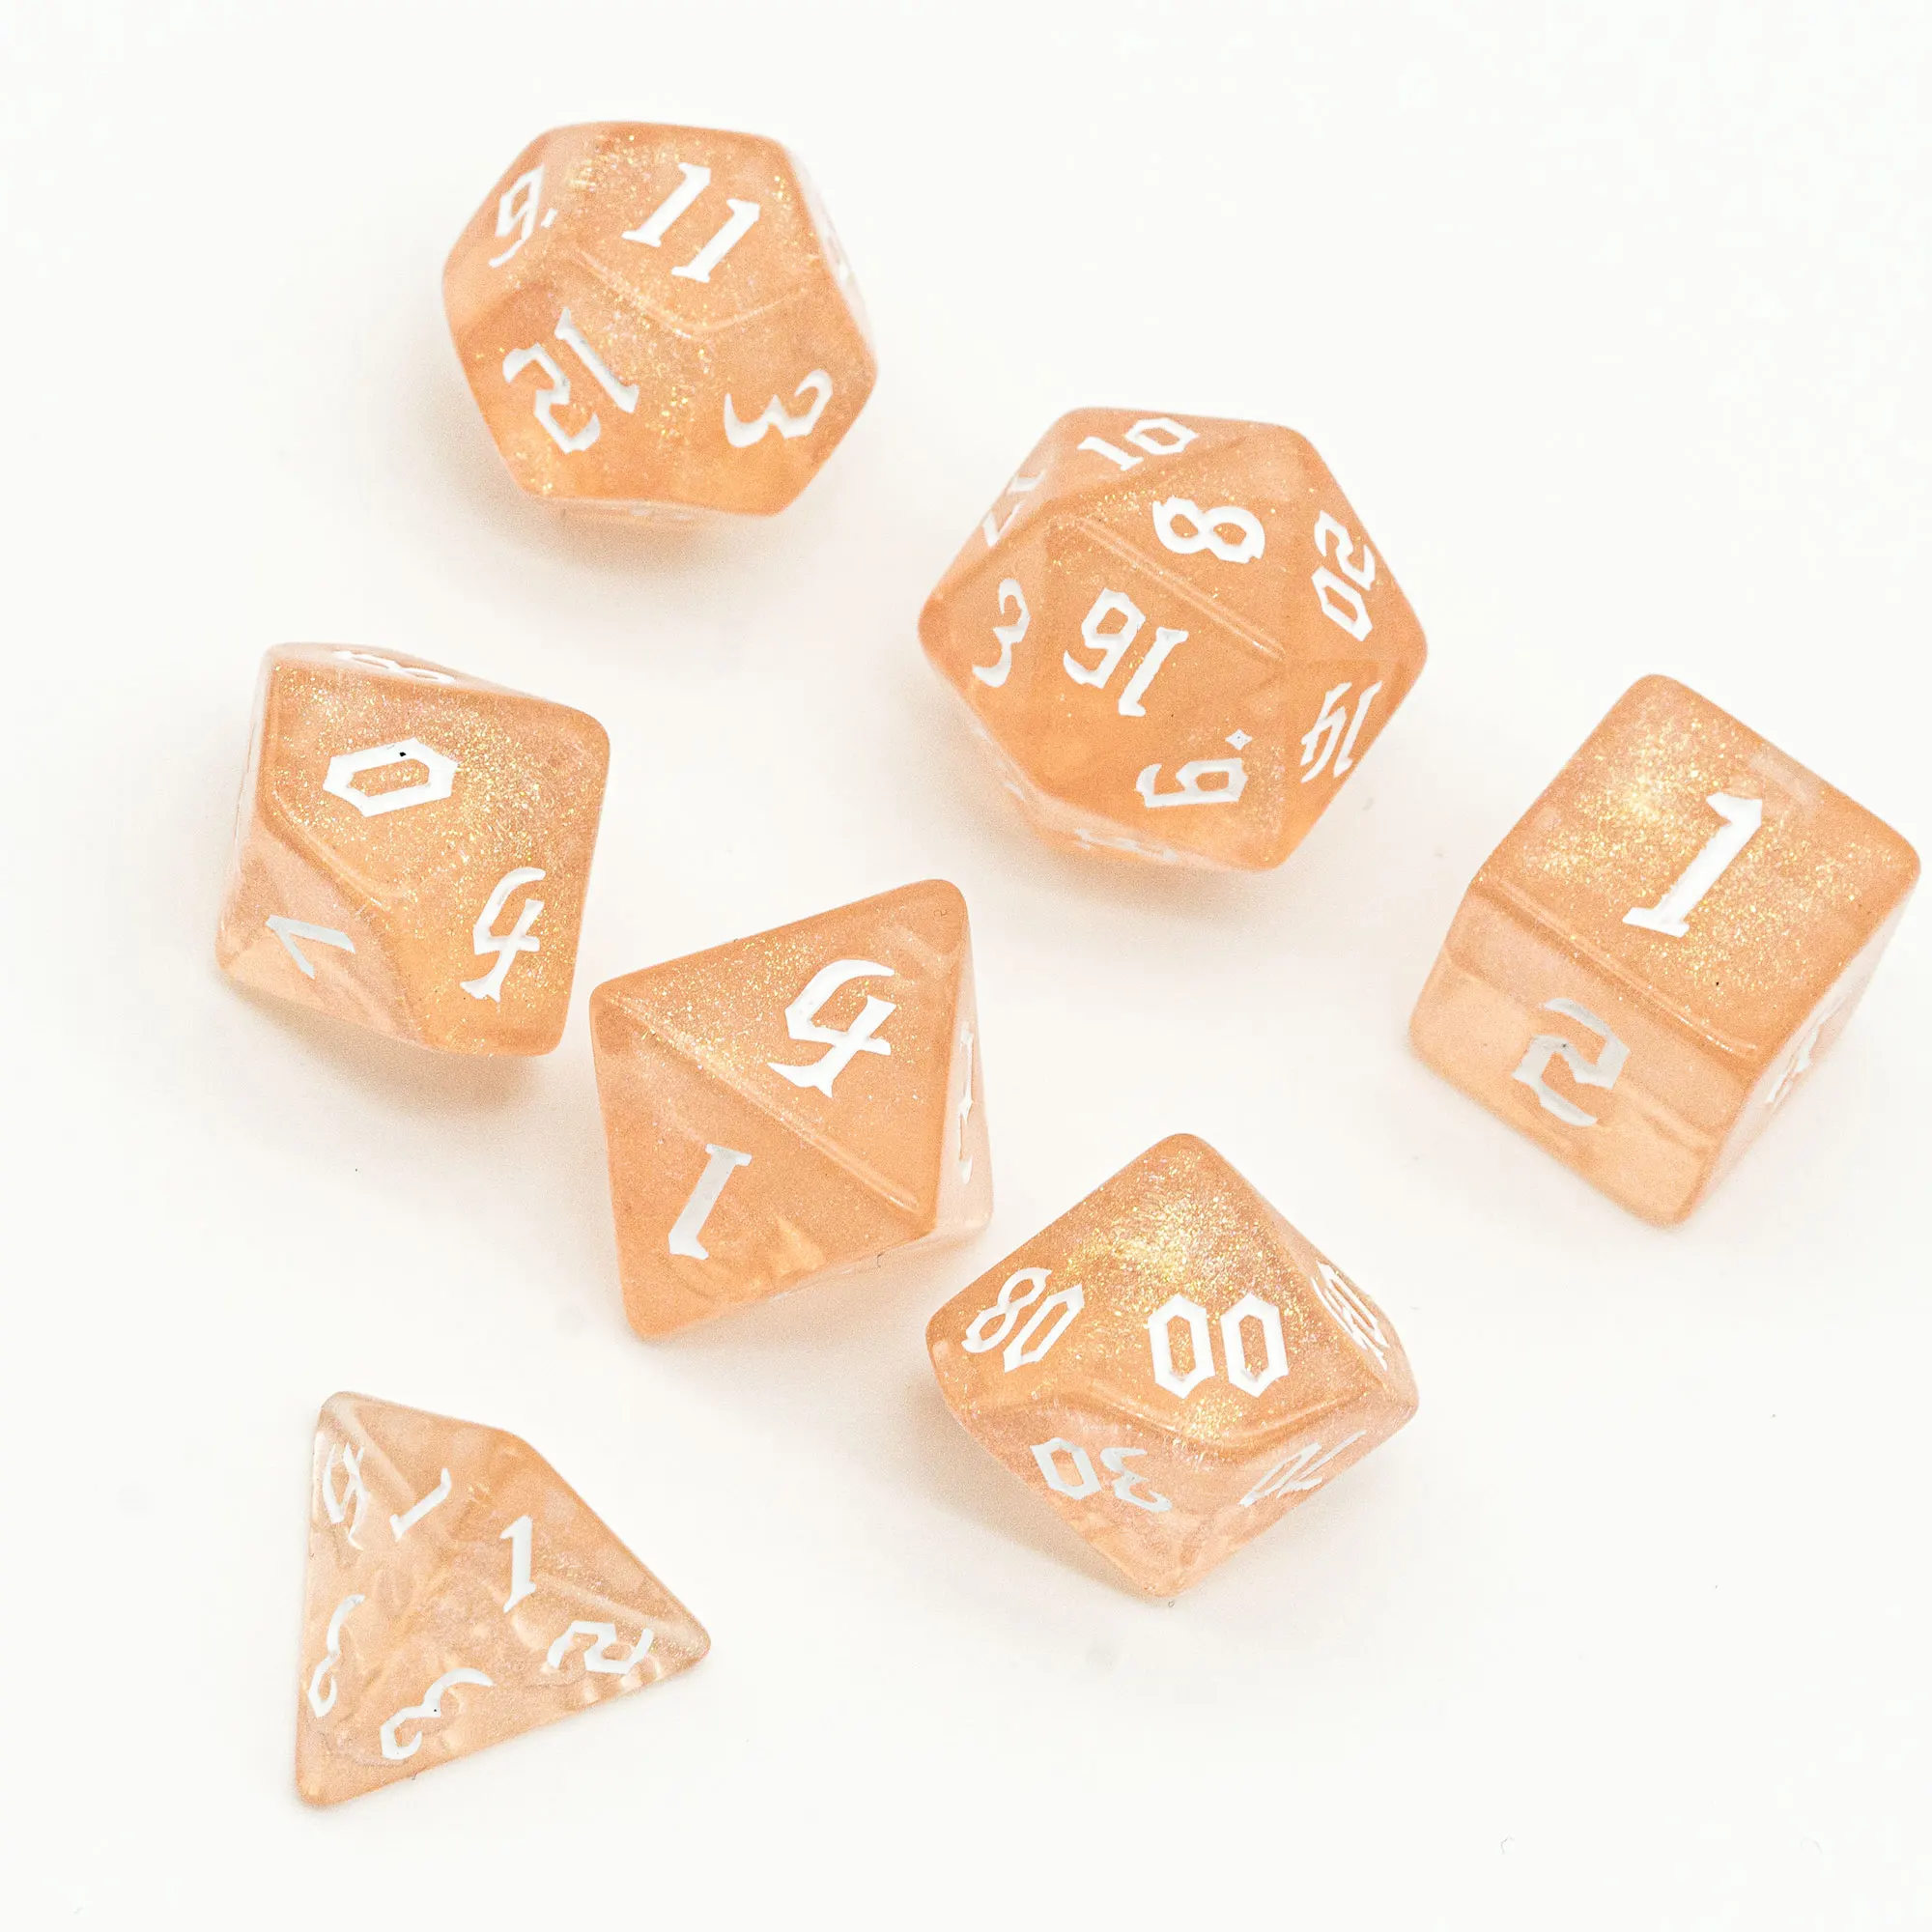 

7Pcs/Set Orange/White DND Dice Set D4 D6 D8 D10 D% D12 D20 Translucent Polyhedral Dice for Role Playing Board Game D&D TRPG MTG